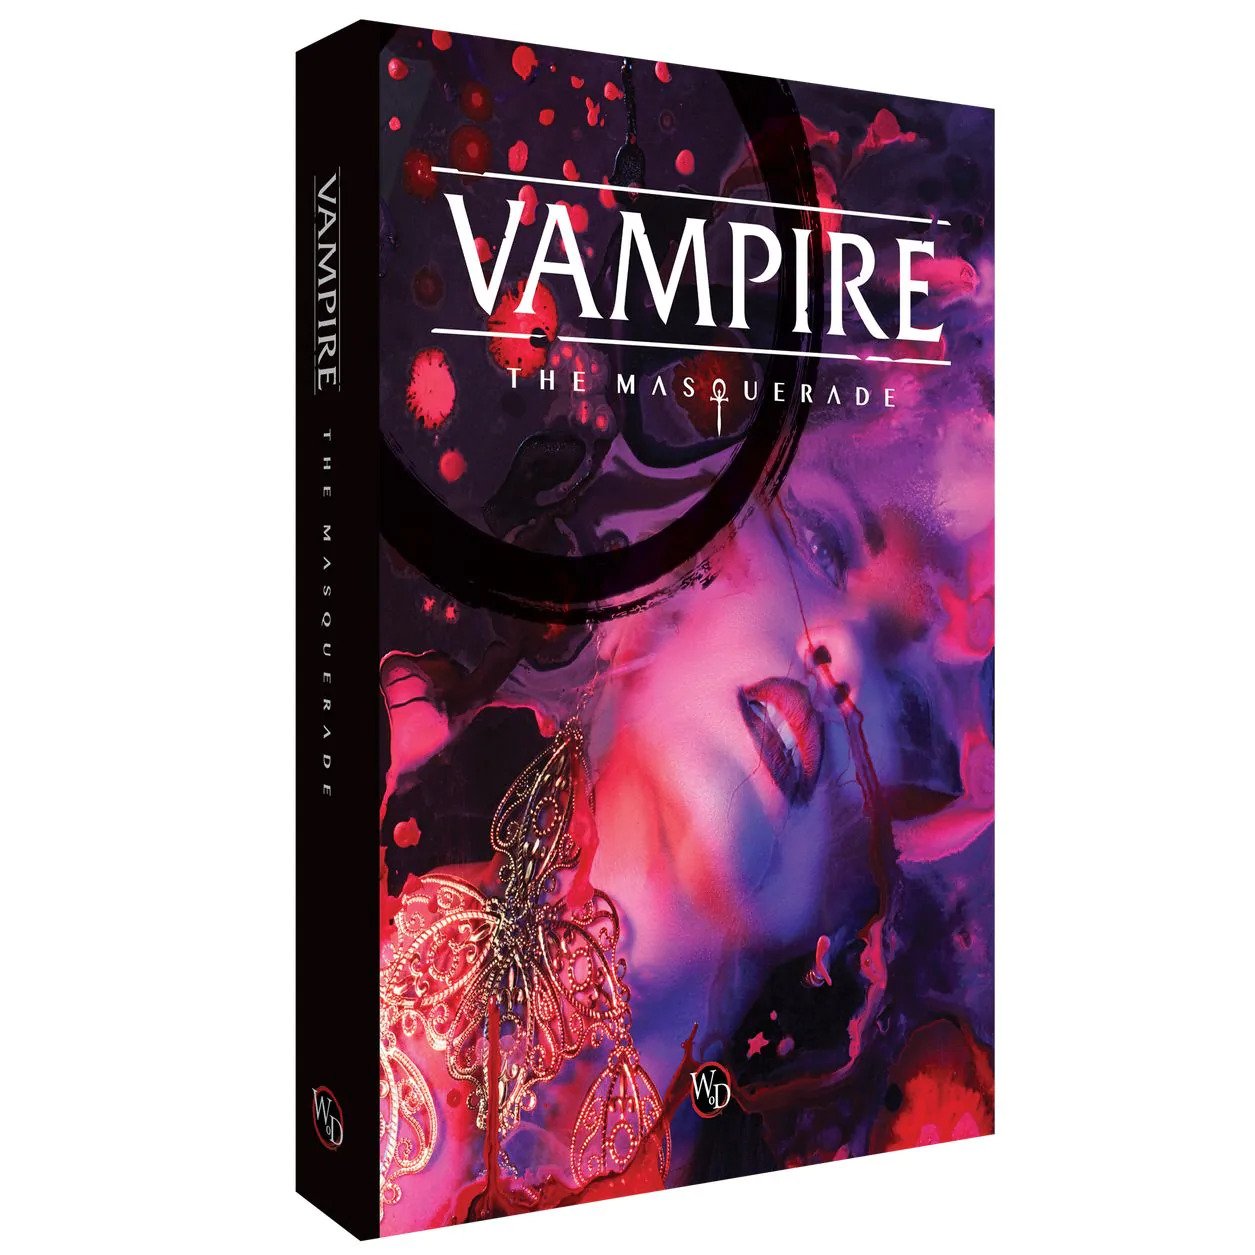 Vampire: The Masquerade V5 - War of Ages is the game's first